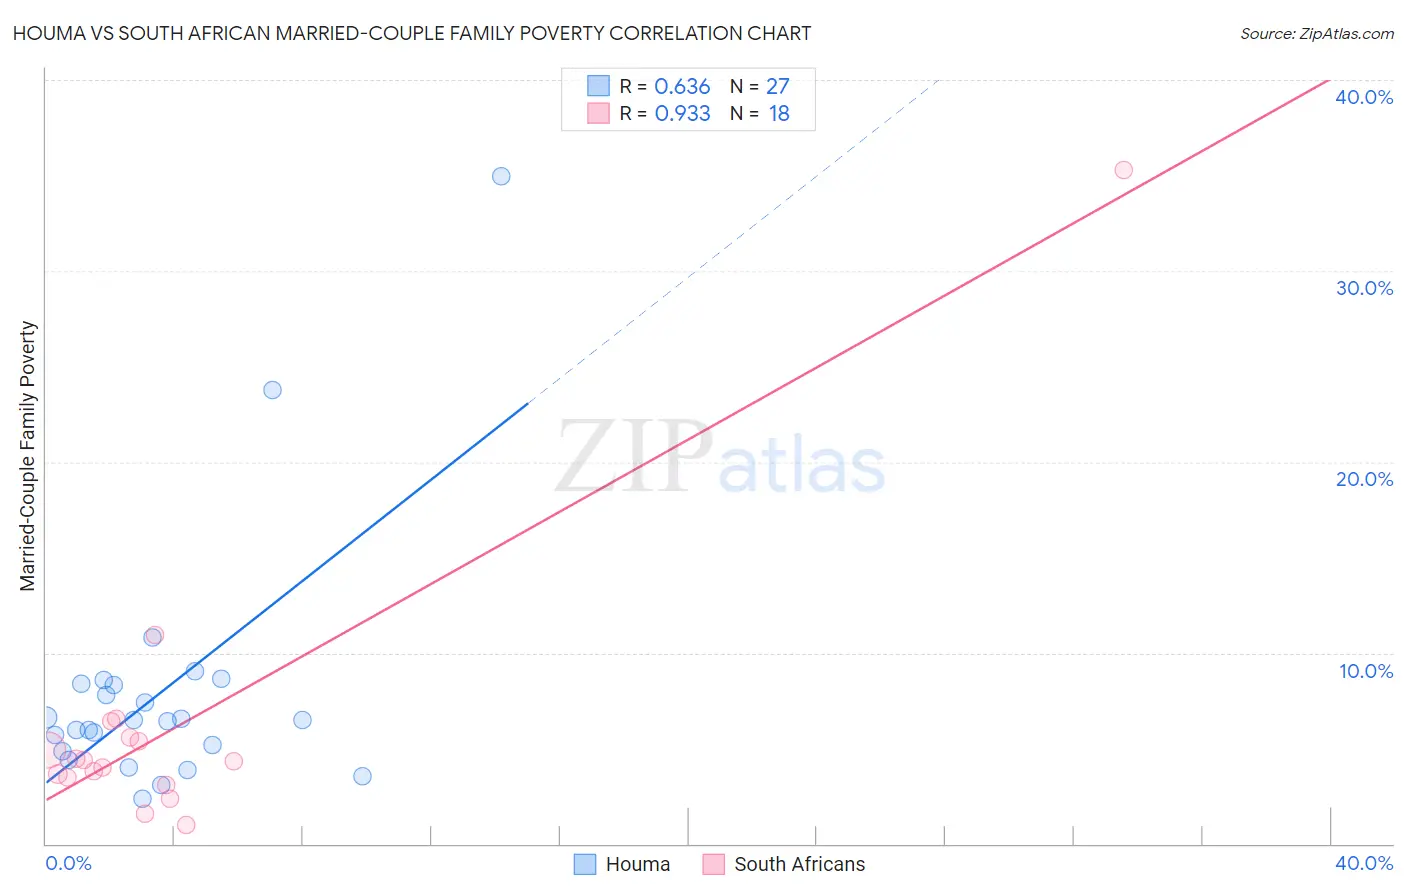 Houma vs South African Married-Couple Family Poverty